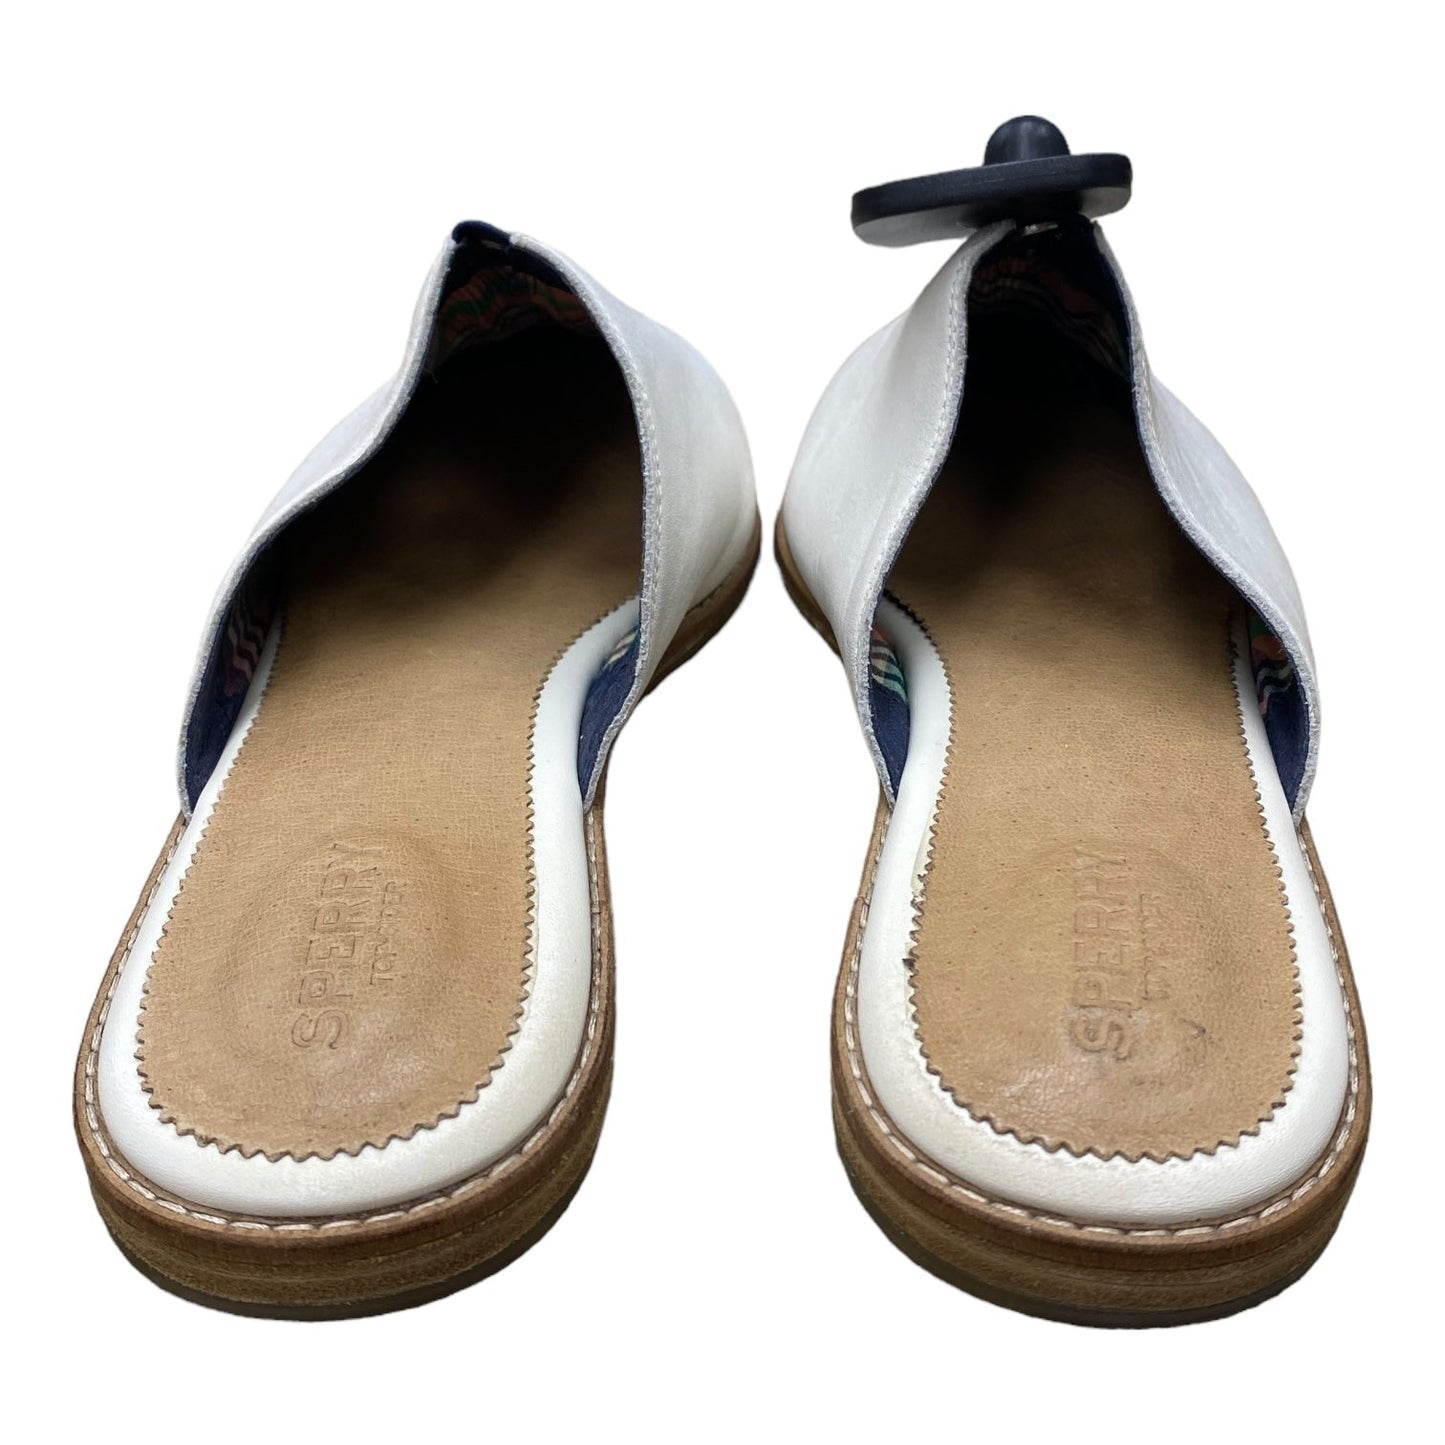 White Shoes Flats Sperry, Size 11